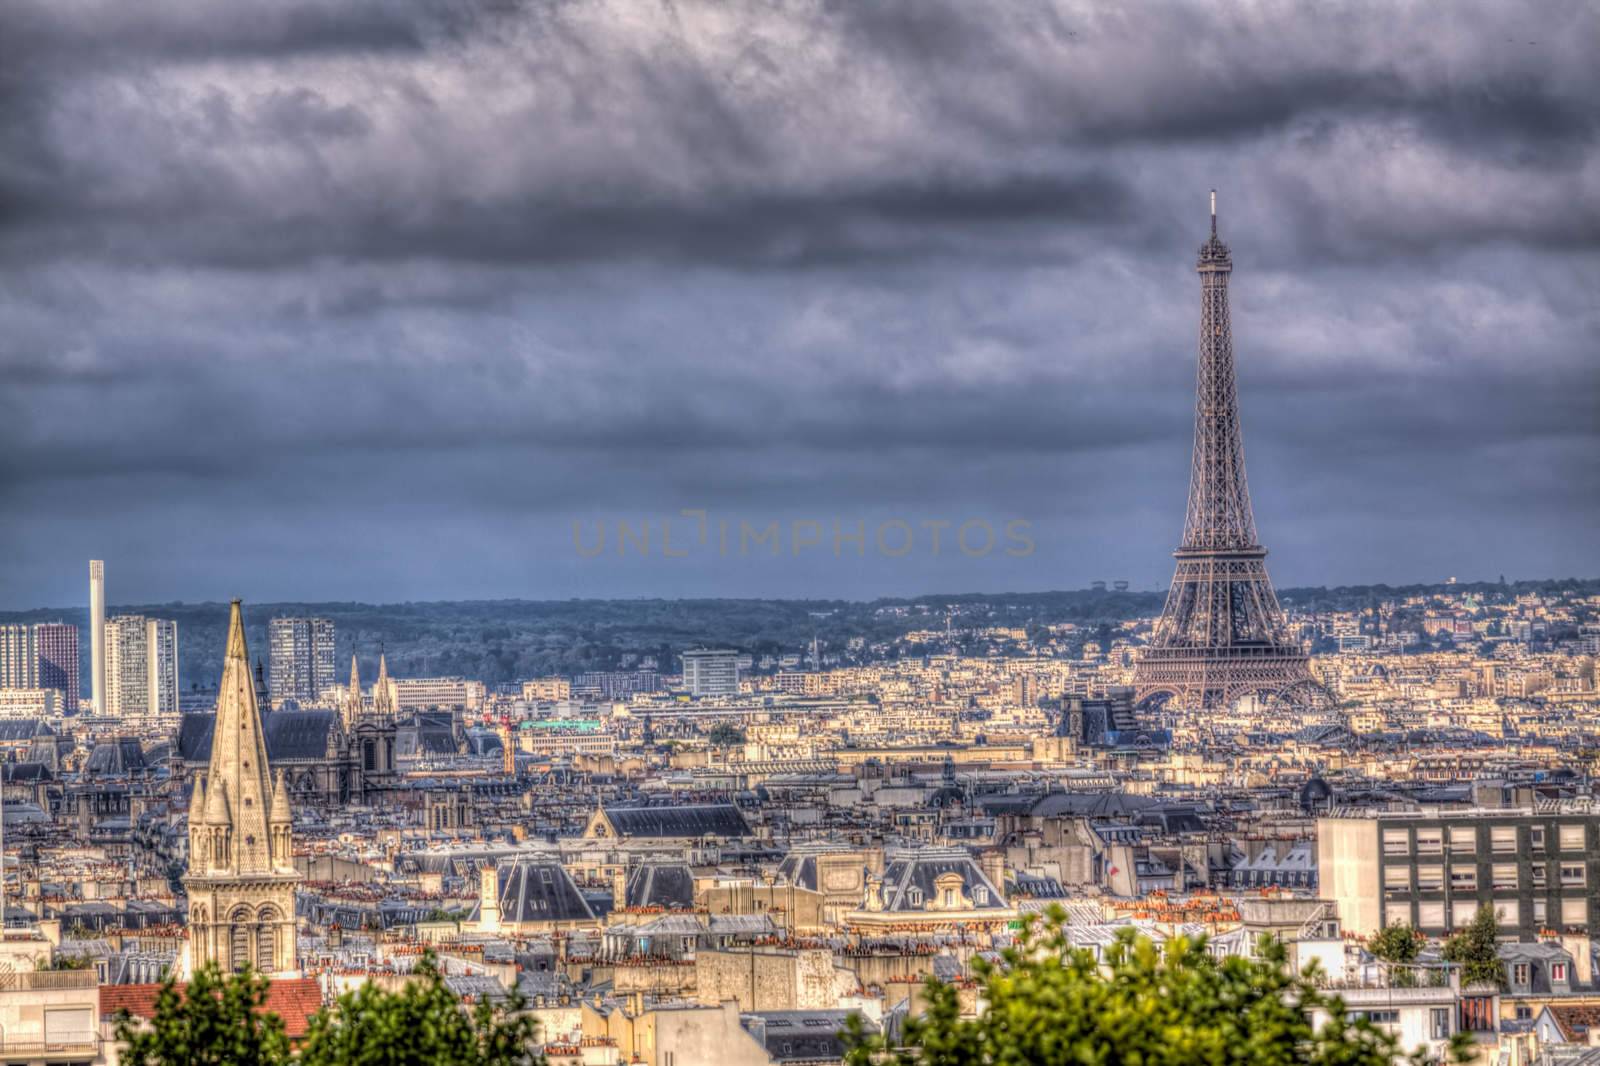 Paris cityscape with Eiffel Tower by Harvepino